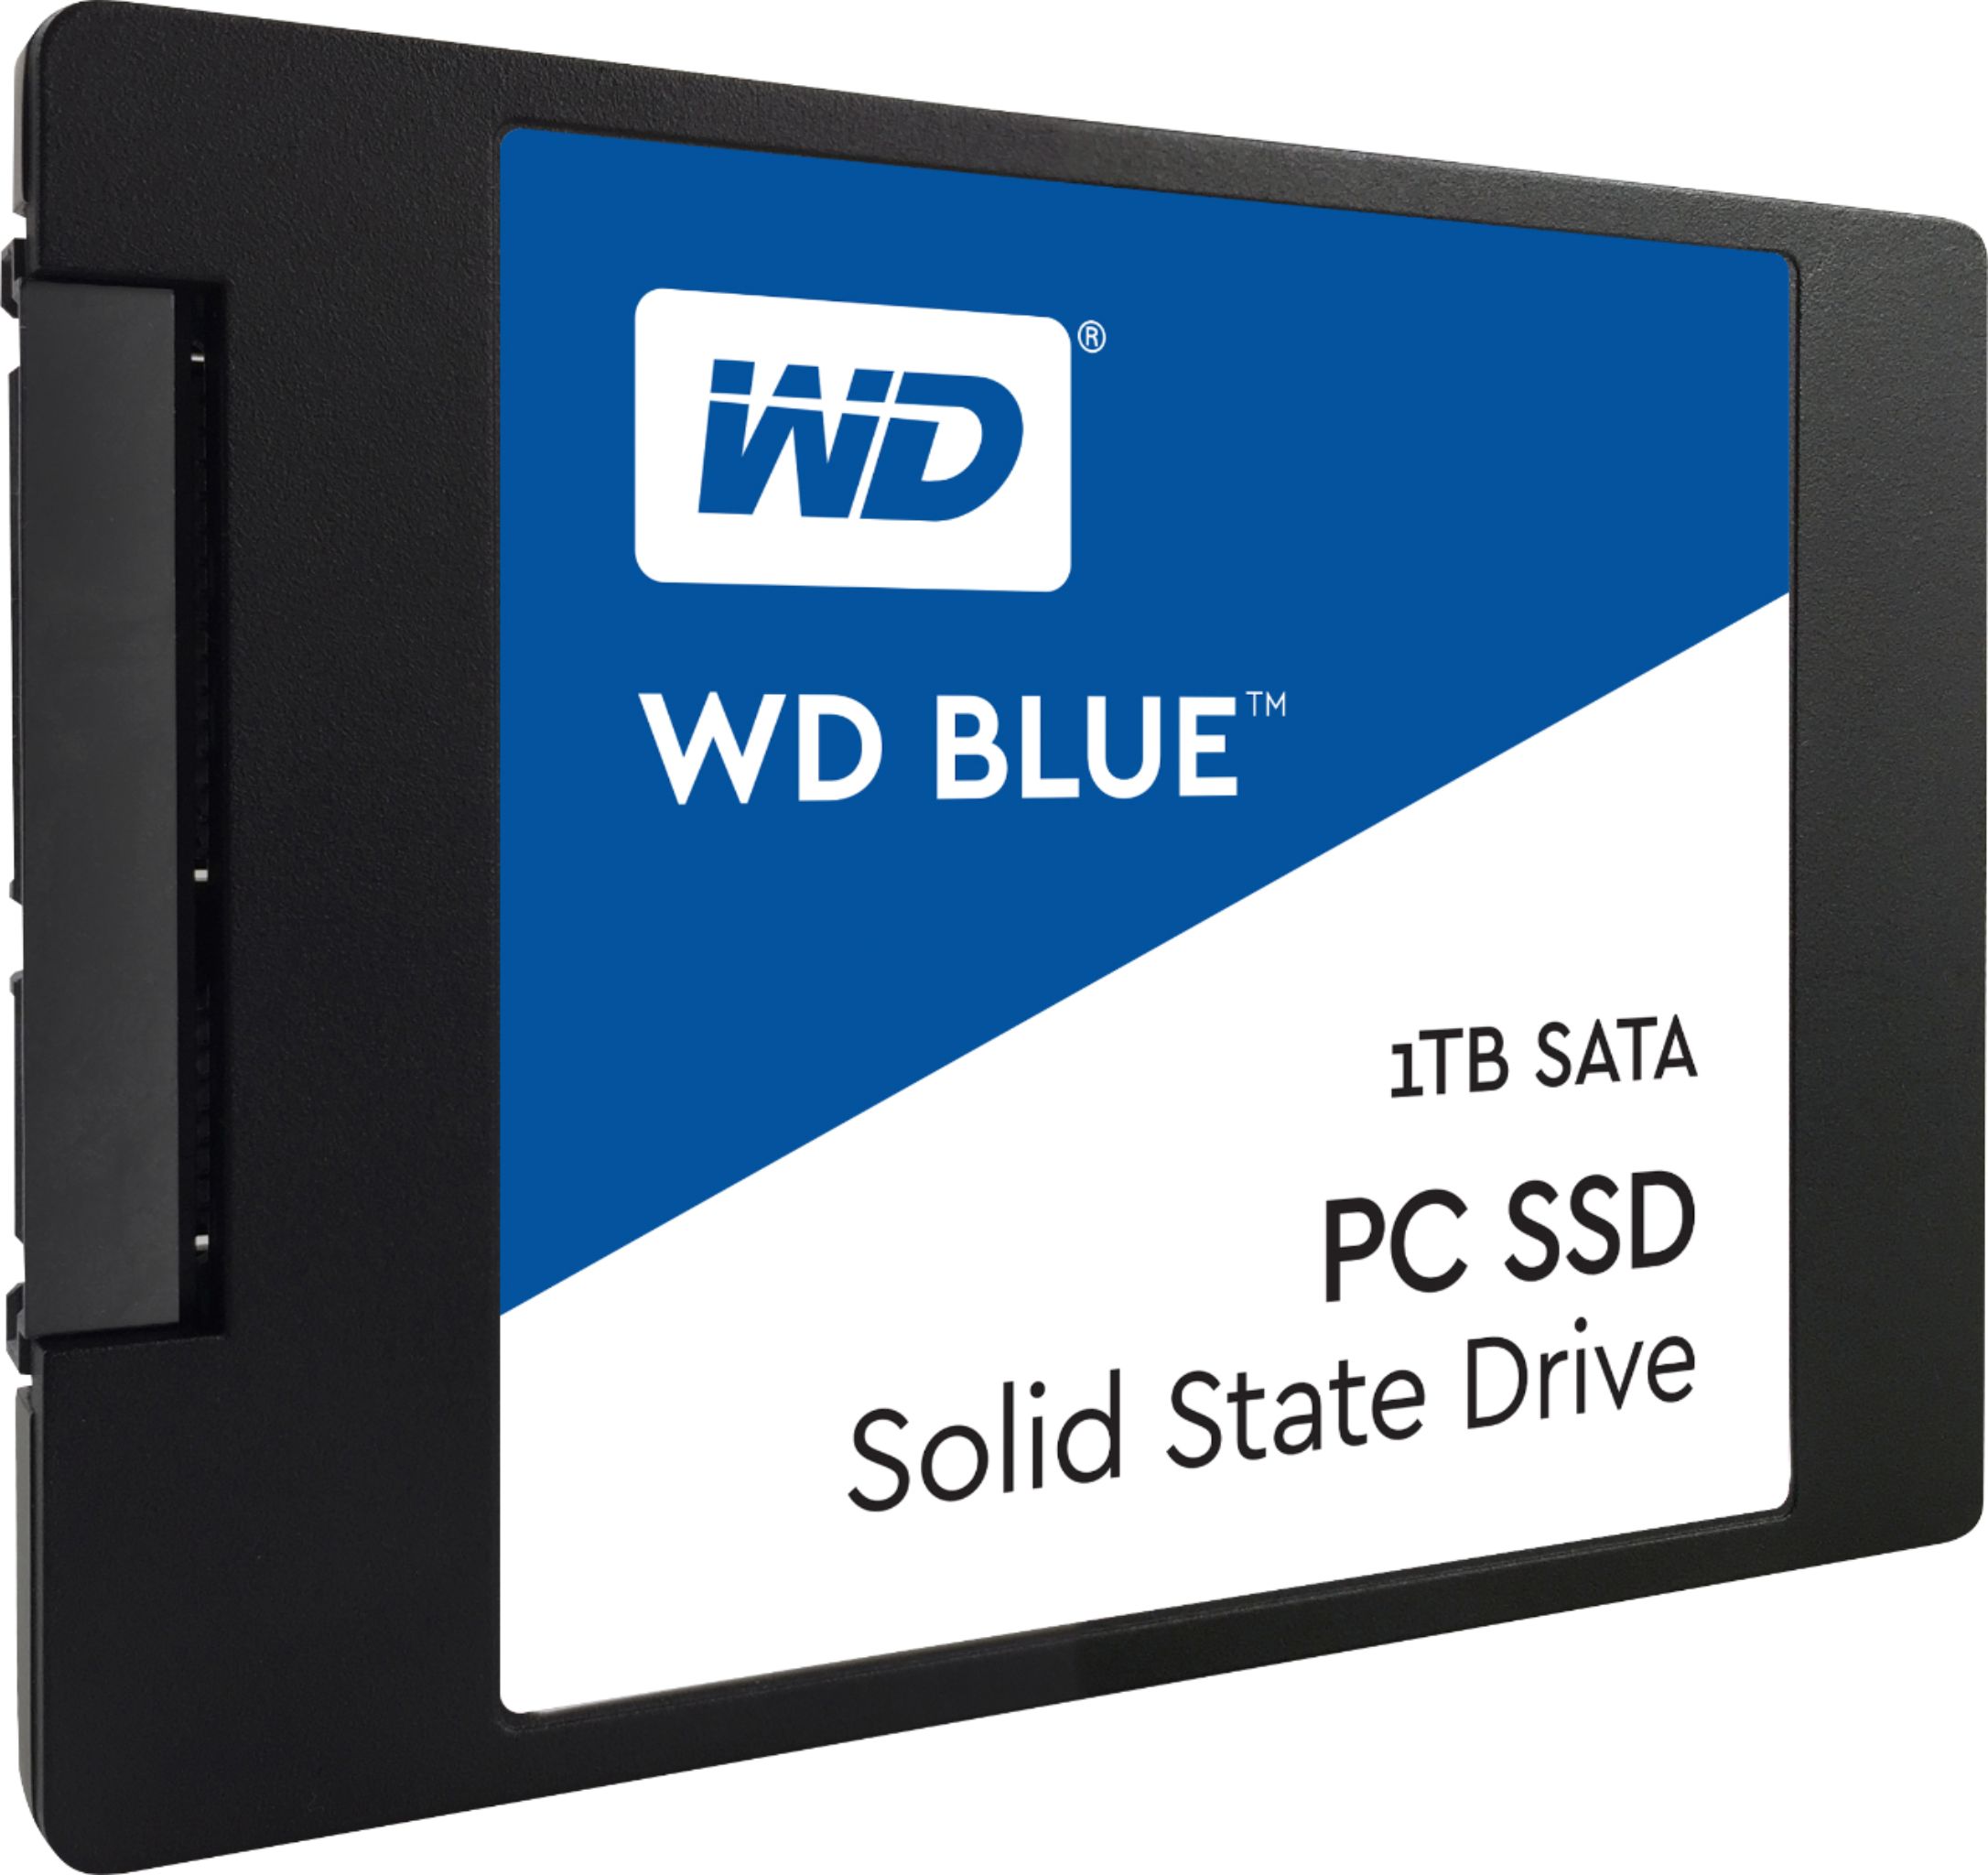 What Does 1TB SSD Storage Mean